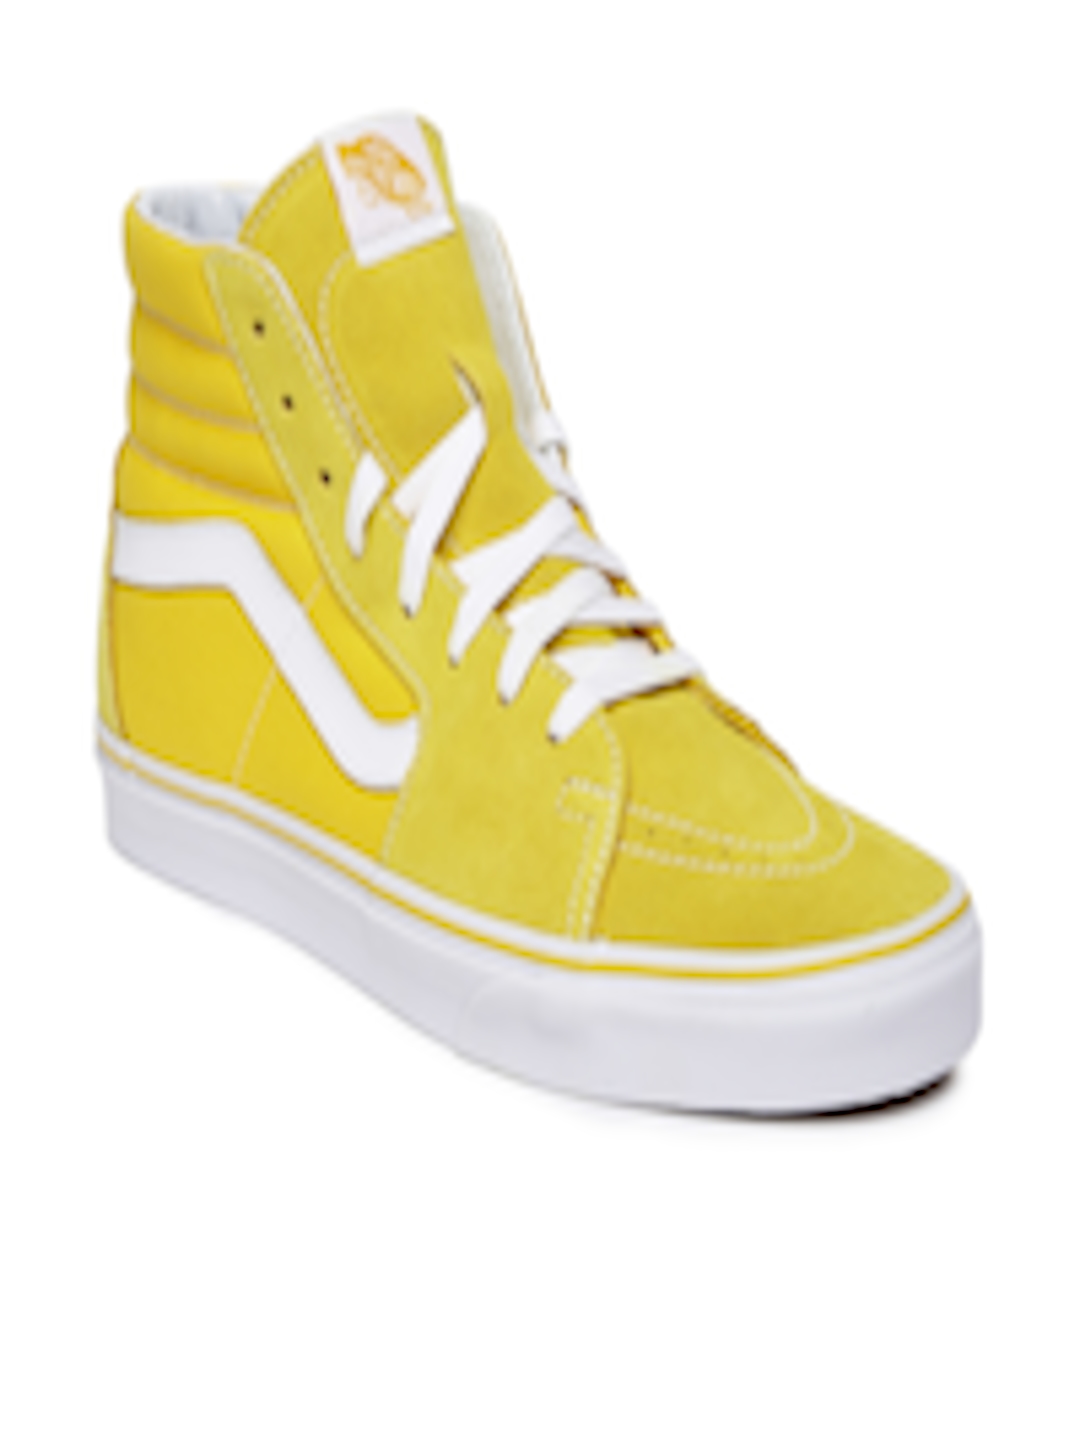 Buy Vans Unisex Yellow Solid High Top Skate Shoes - Casual Shoes for